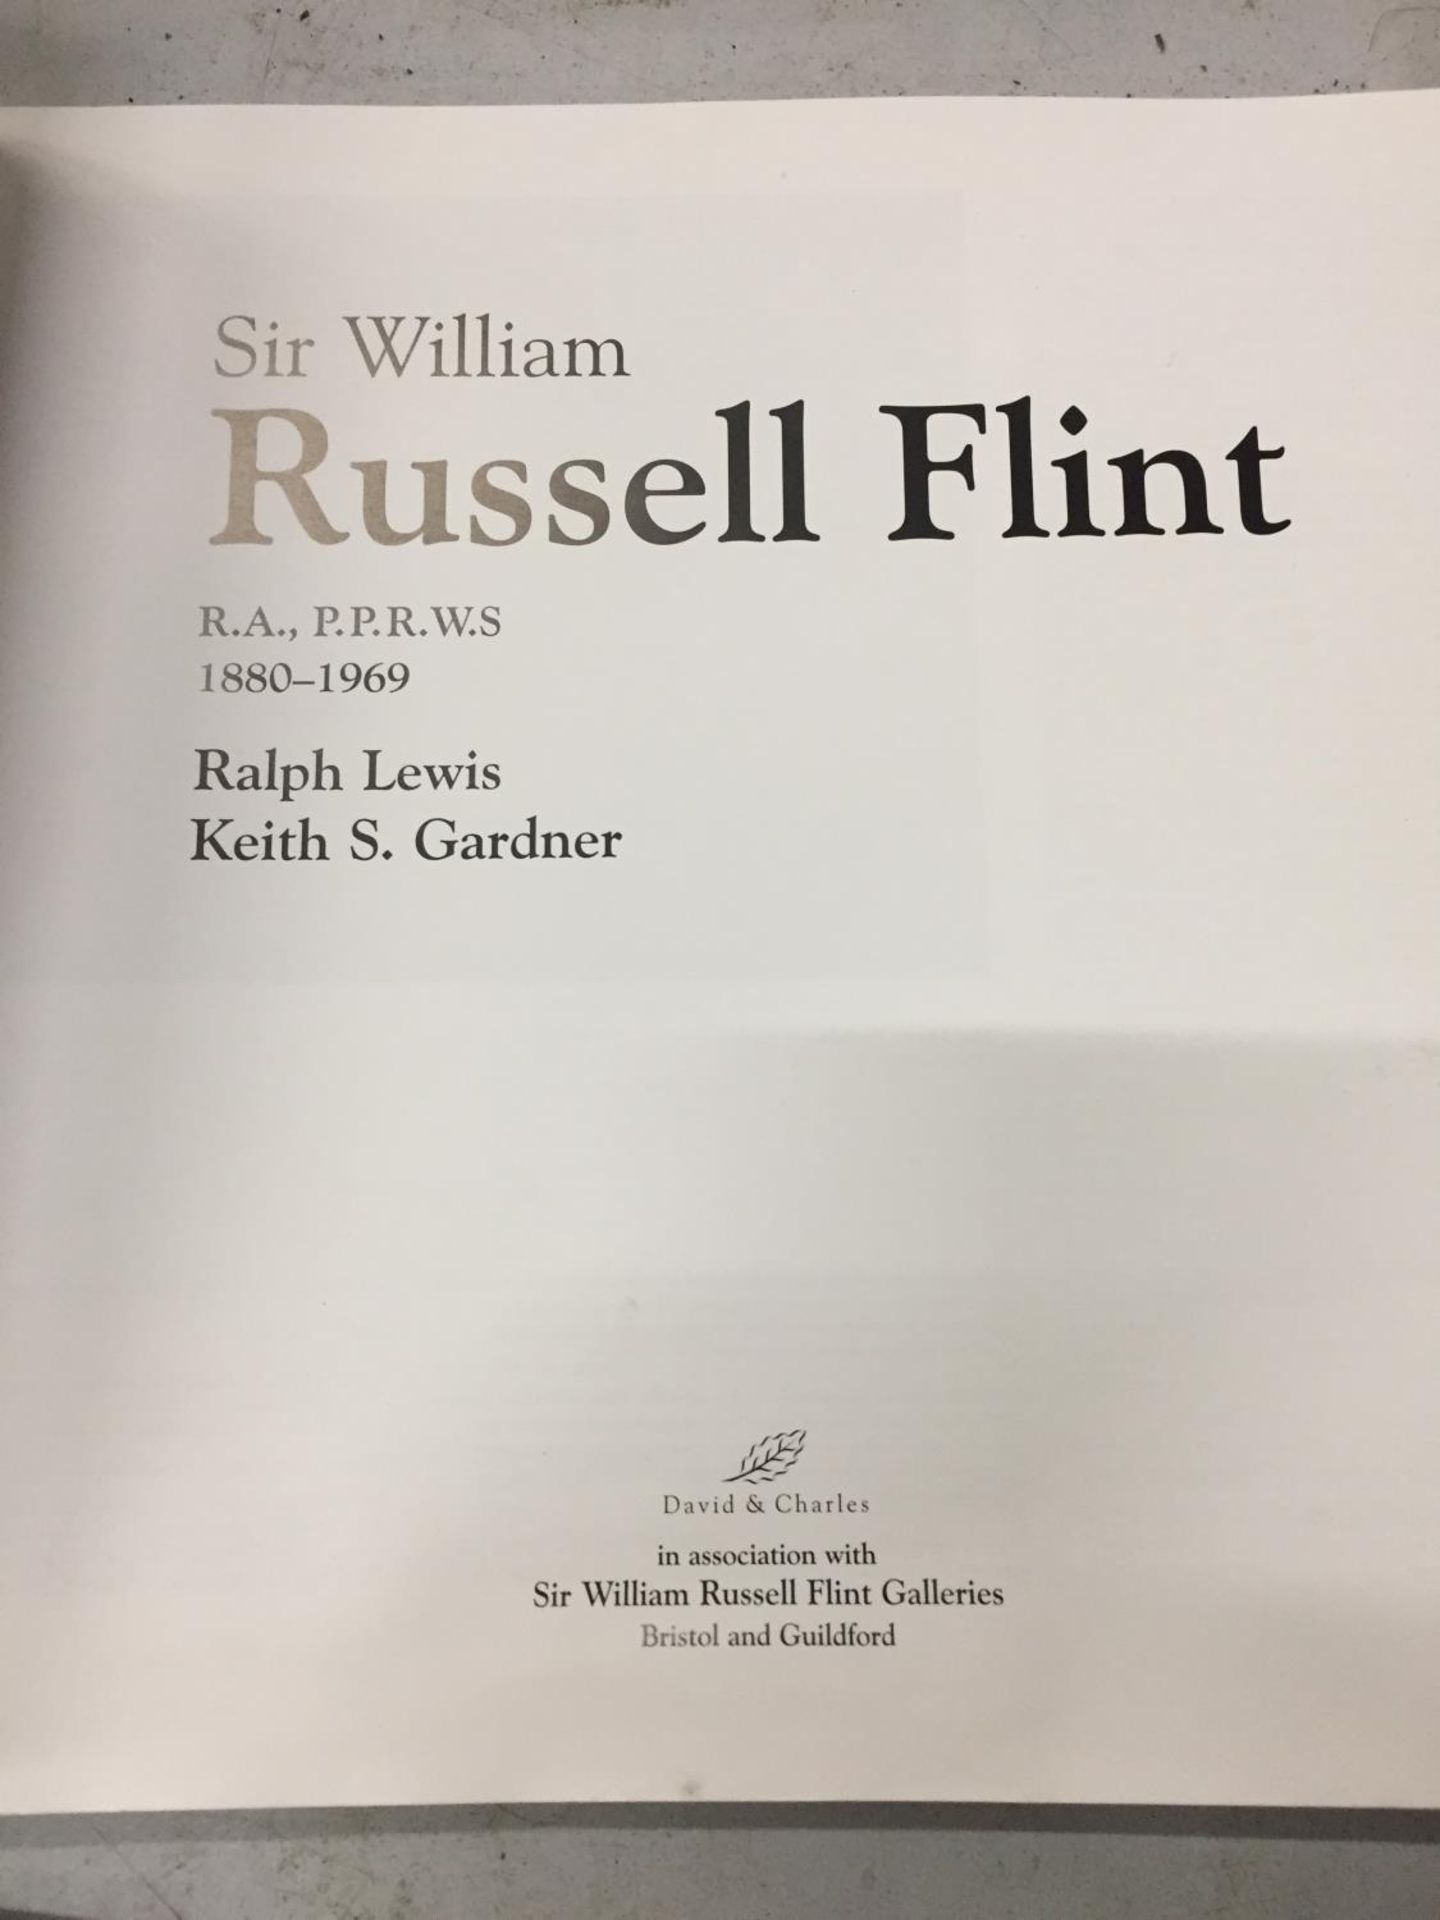 A BOOK ON THE LIFE AND ART OF SIR WILLIAM RUSSELL FLINT - Image 2 of 5